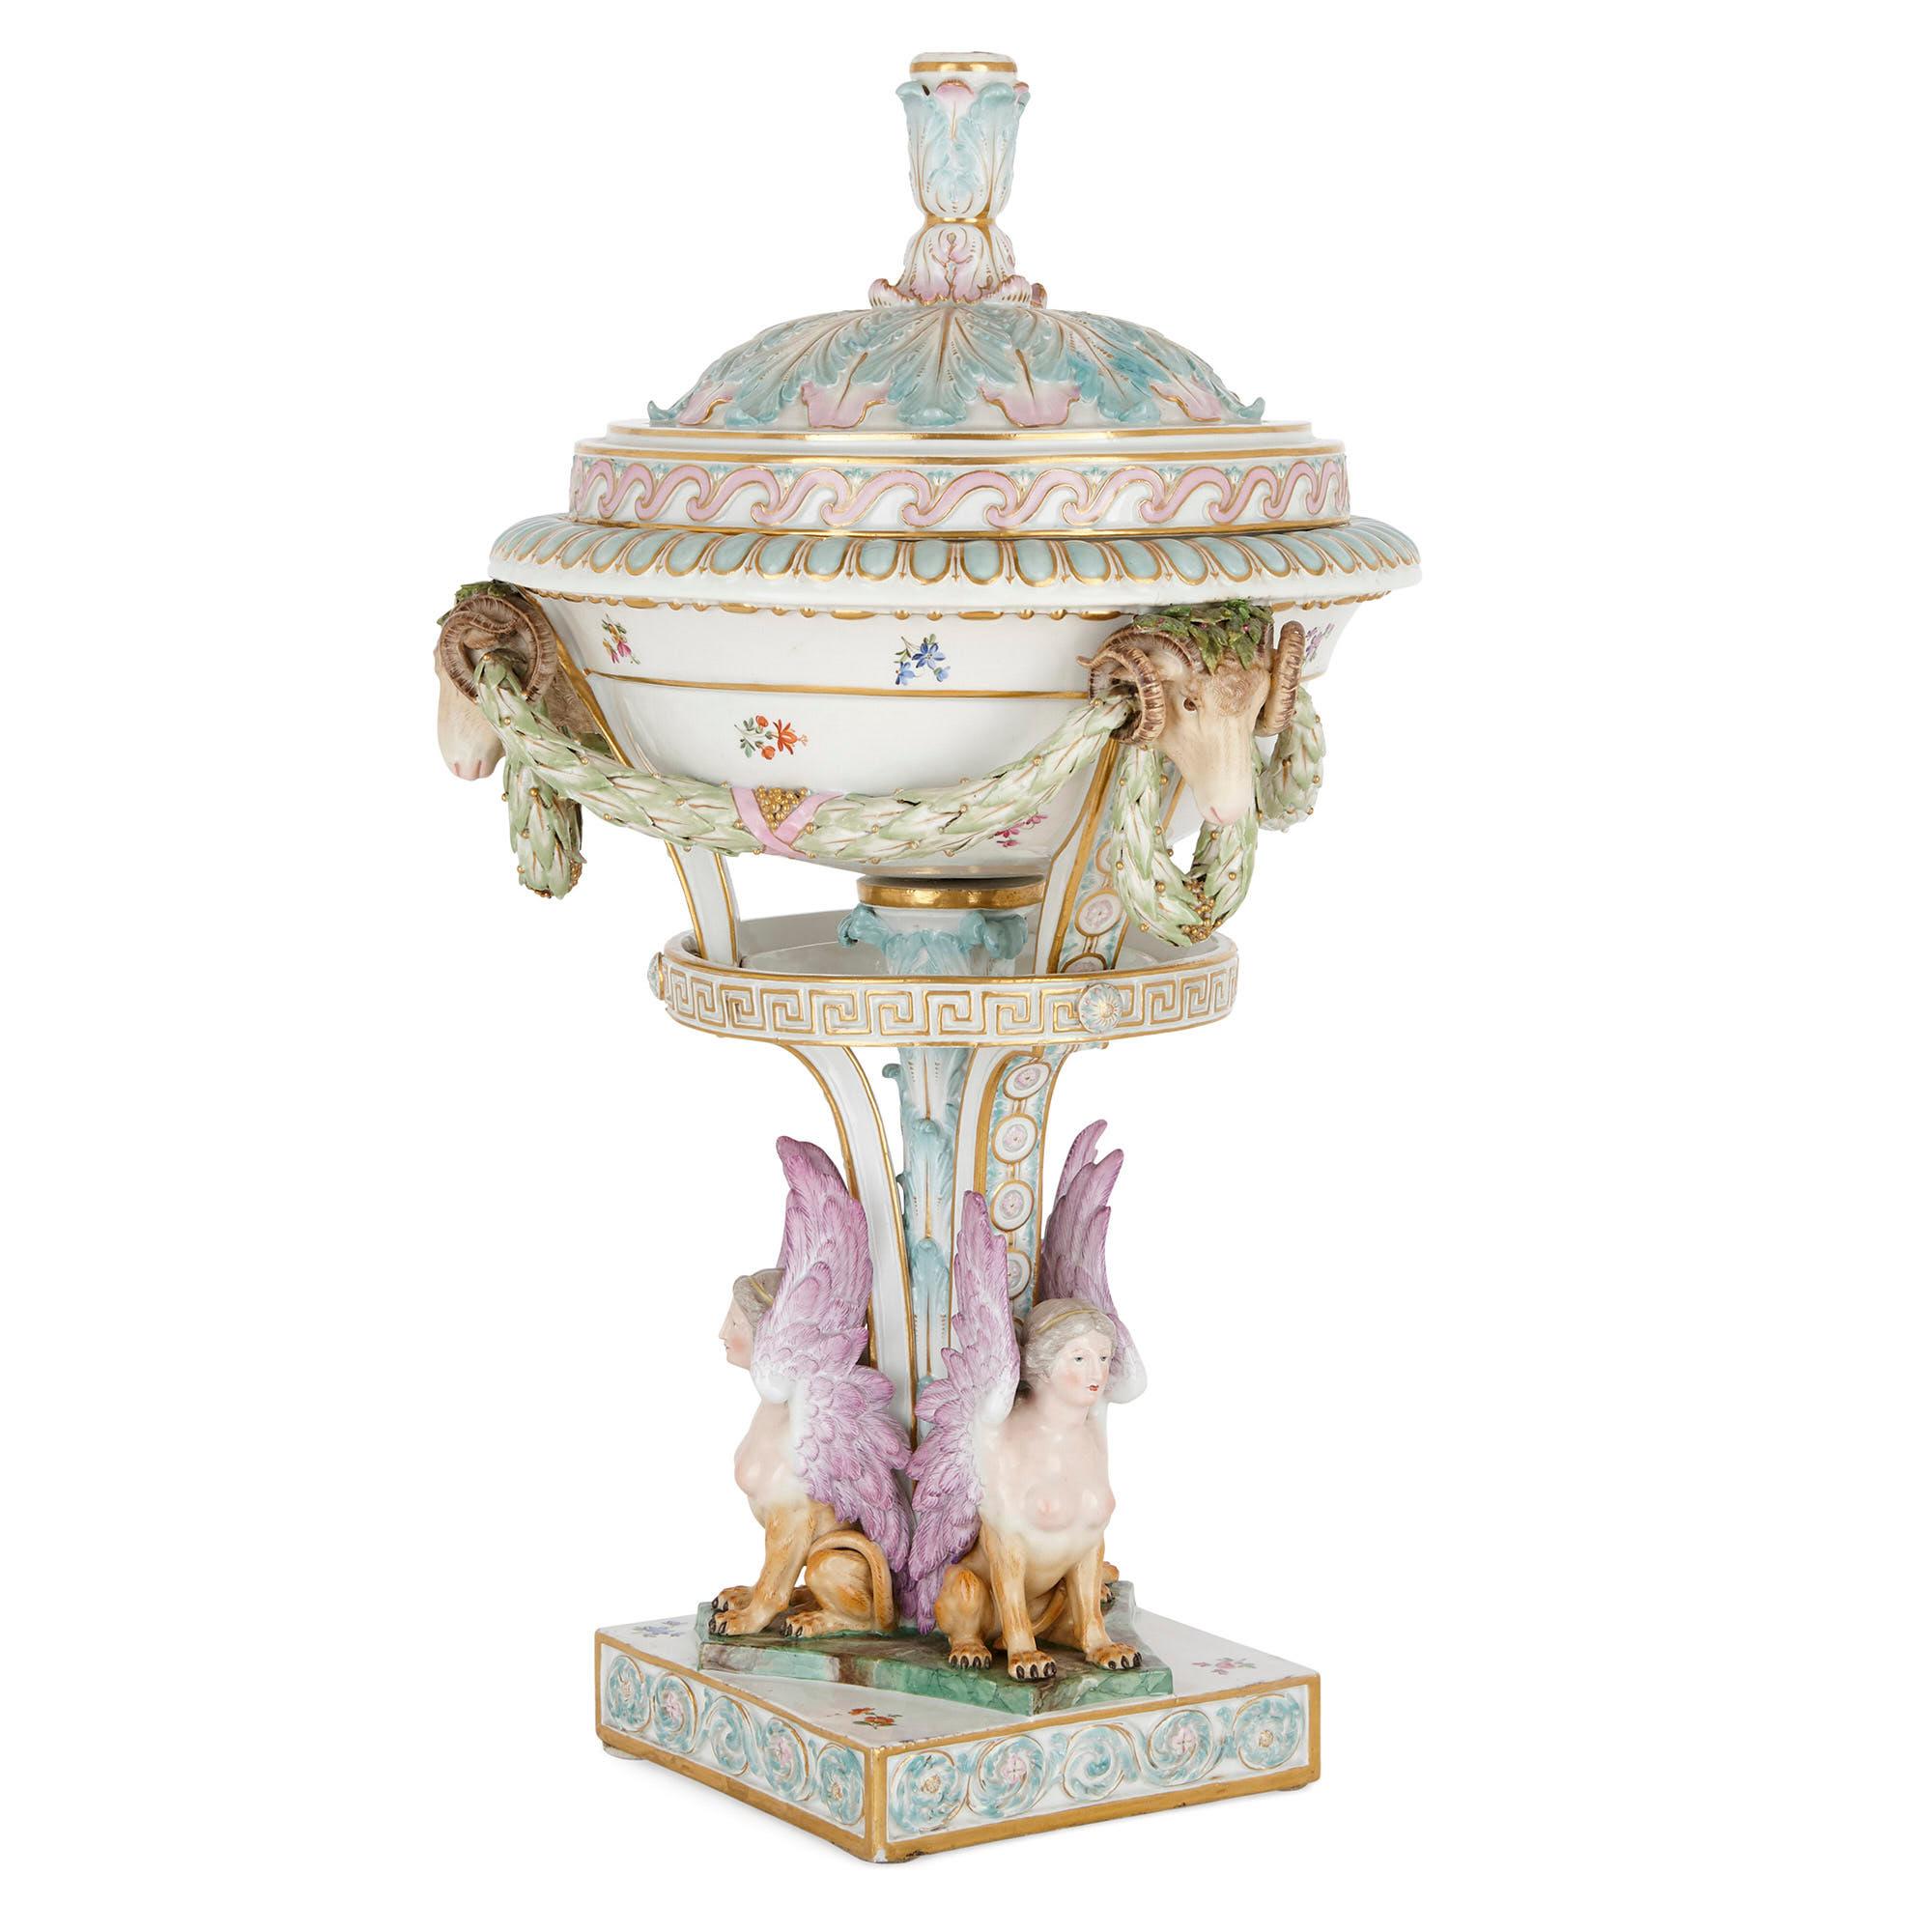 This beautiful vase was created by the world-famous Meissen porcelain factory. Meissen was established in the early 18th century, making it the first producer of hard-paste porcelain in Europe. The company was hugely successful and enjoyed the